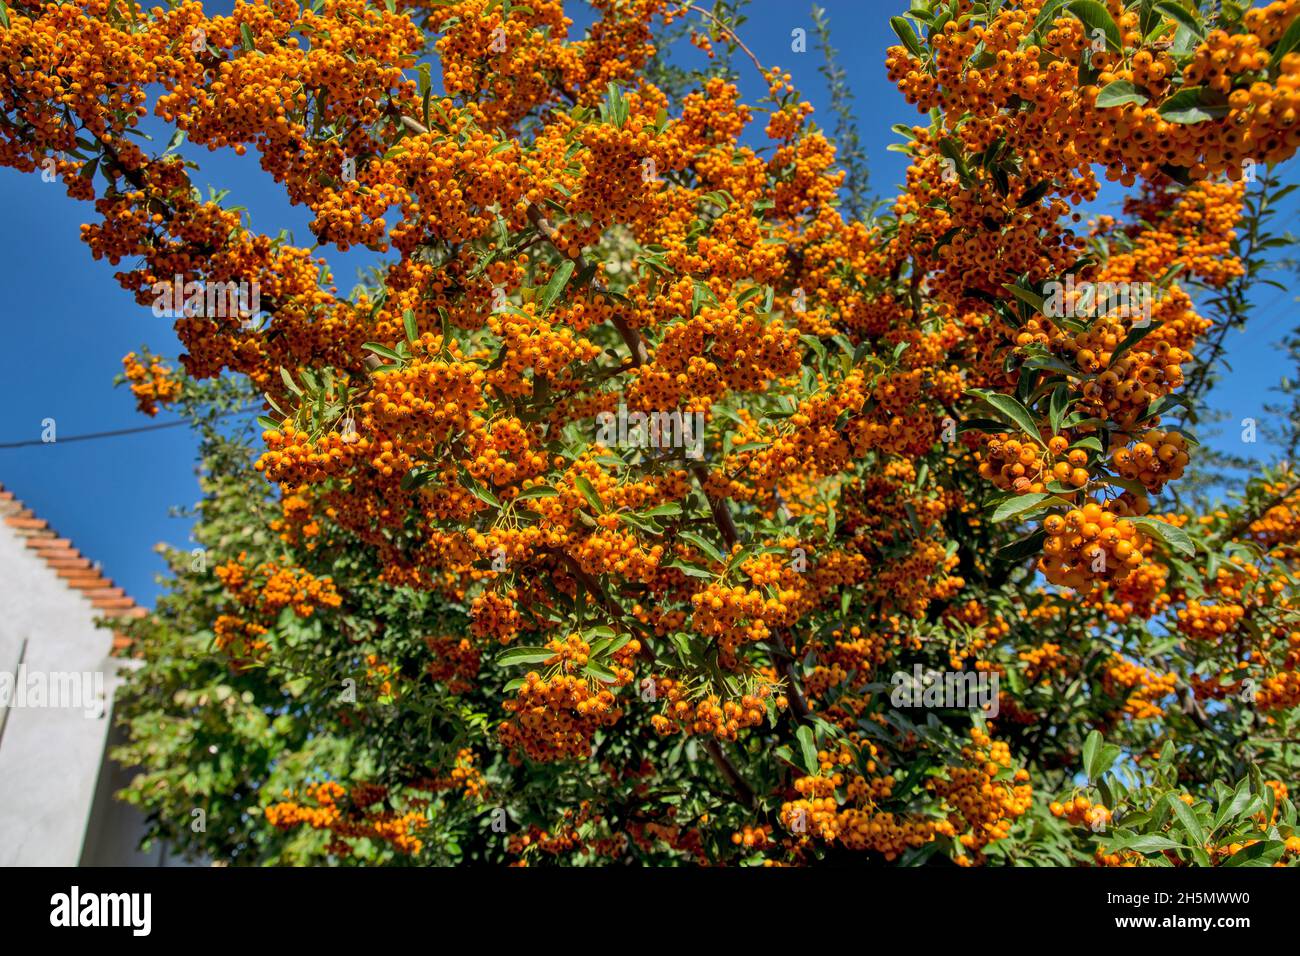 Orange berries on a tree in front of the house. The berries are illuminated by the autumn sun. They are the decoration of the house. Stock Photo